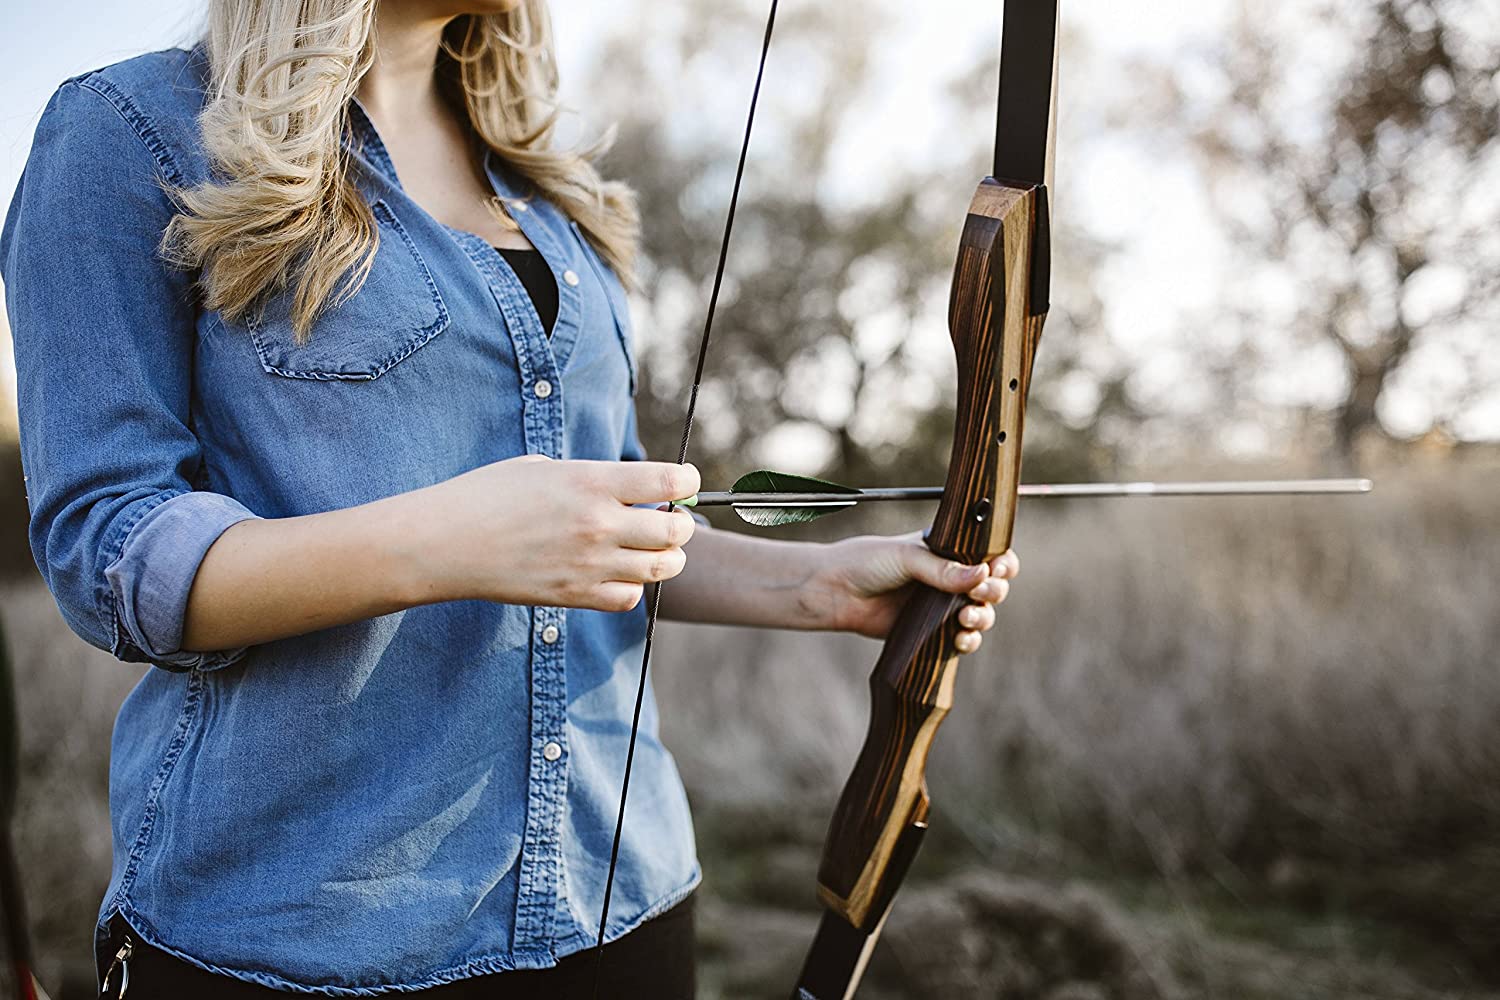 Best Recurve Bow for Hunting